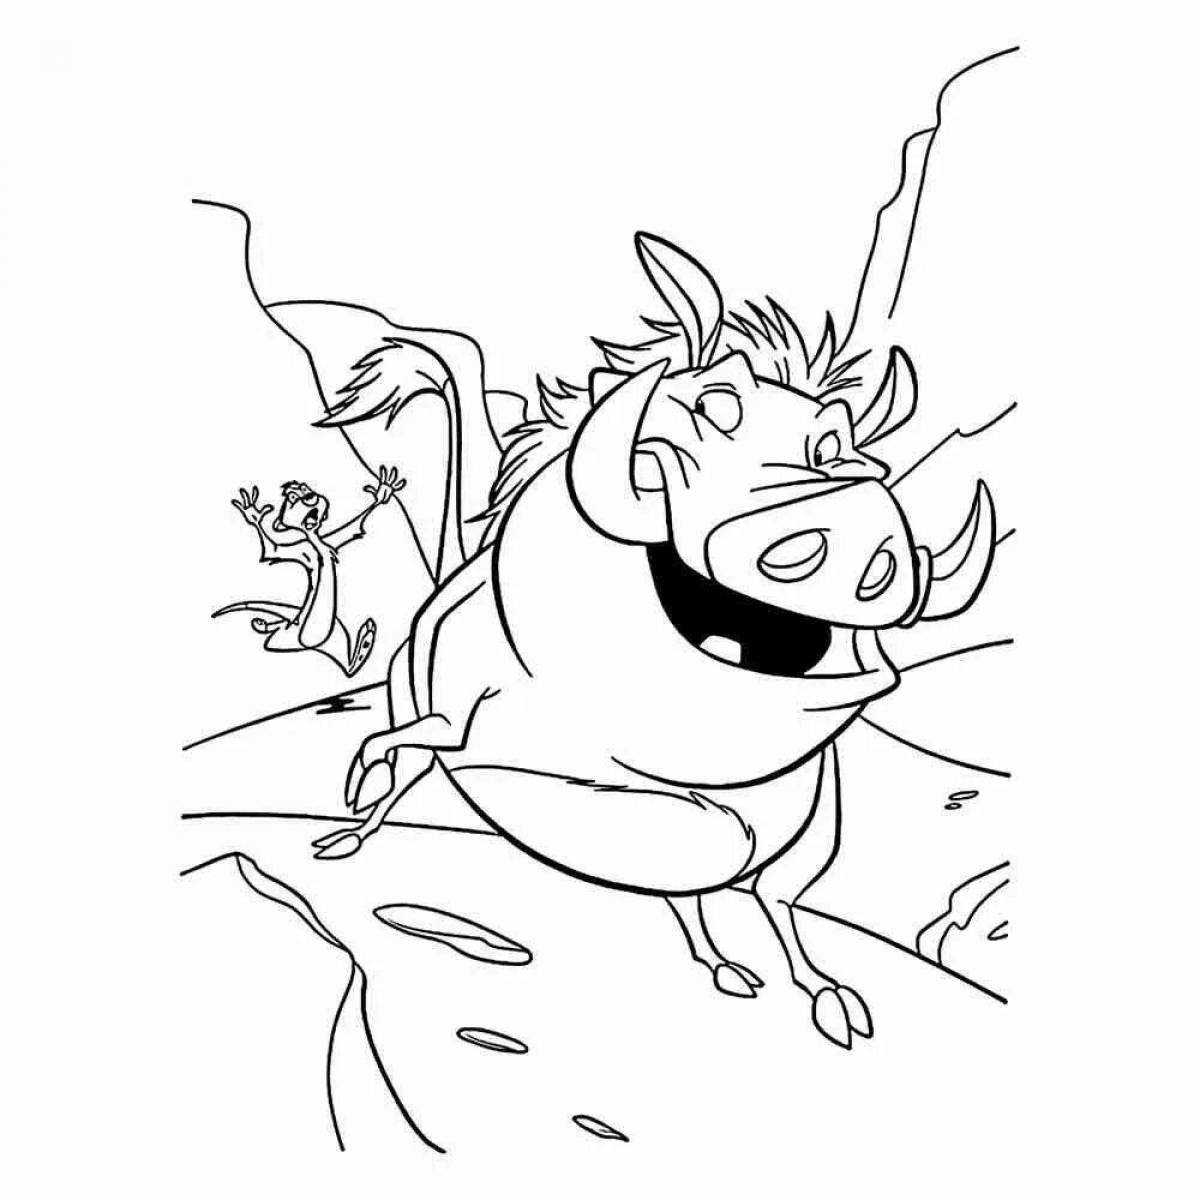 Charming timon and pumbaa coloring book